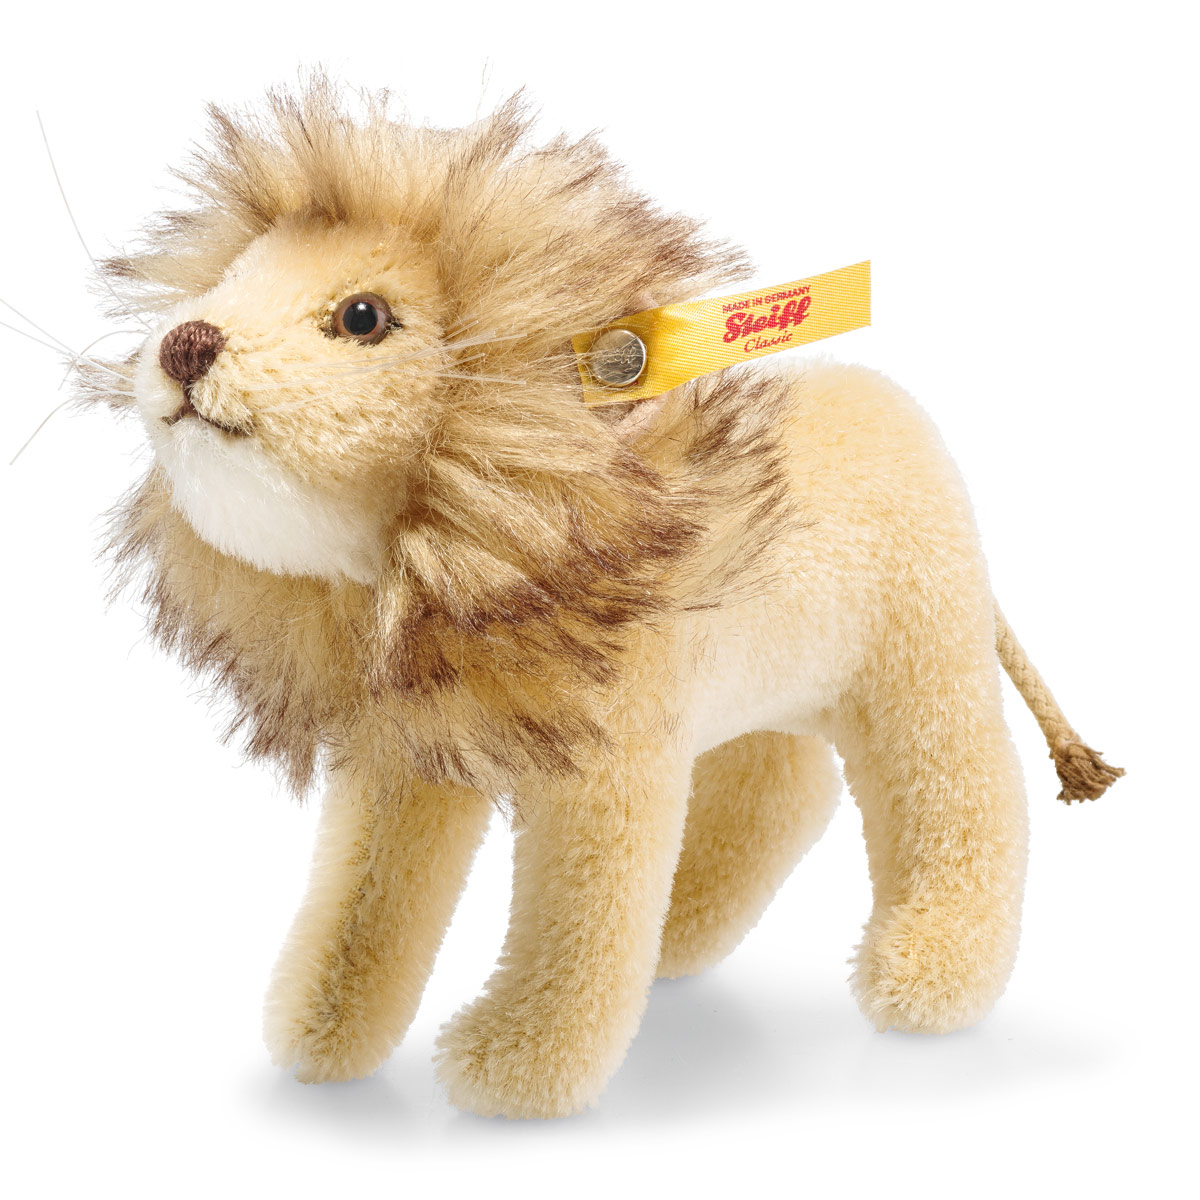 Steiff National Geographic Lion in Gift Box